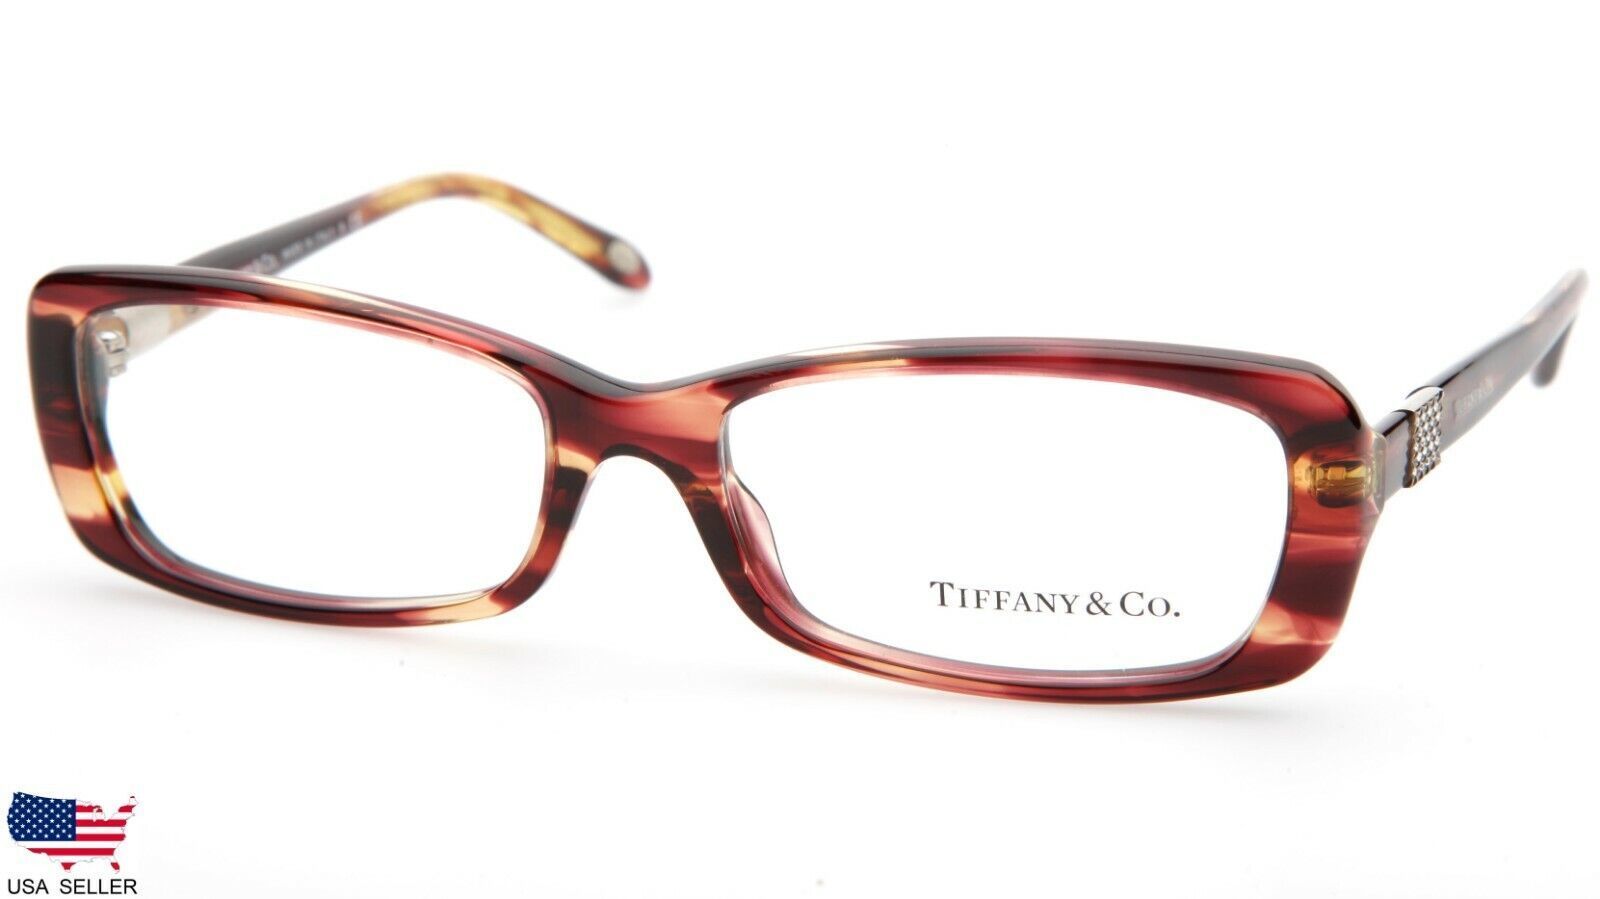 Primary image for NEW TIFFANY & Co. TF 2070-B 8081 SPOTTED VIOLET EYEGLASSES FRAME 55-16-135 Italy